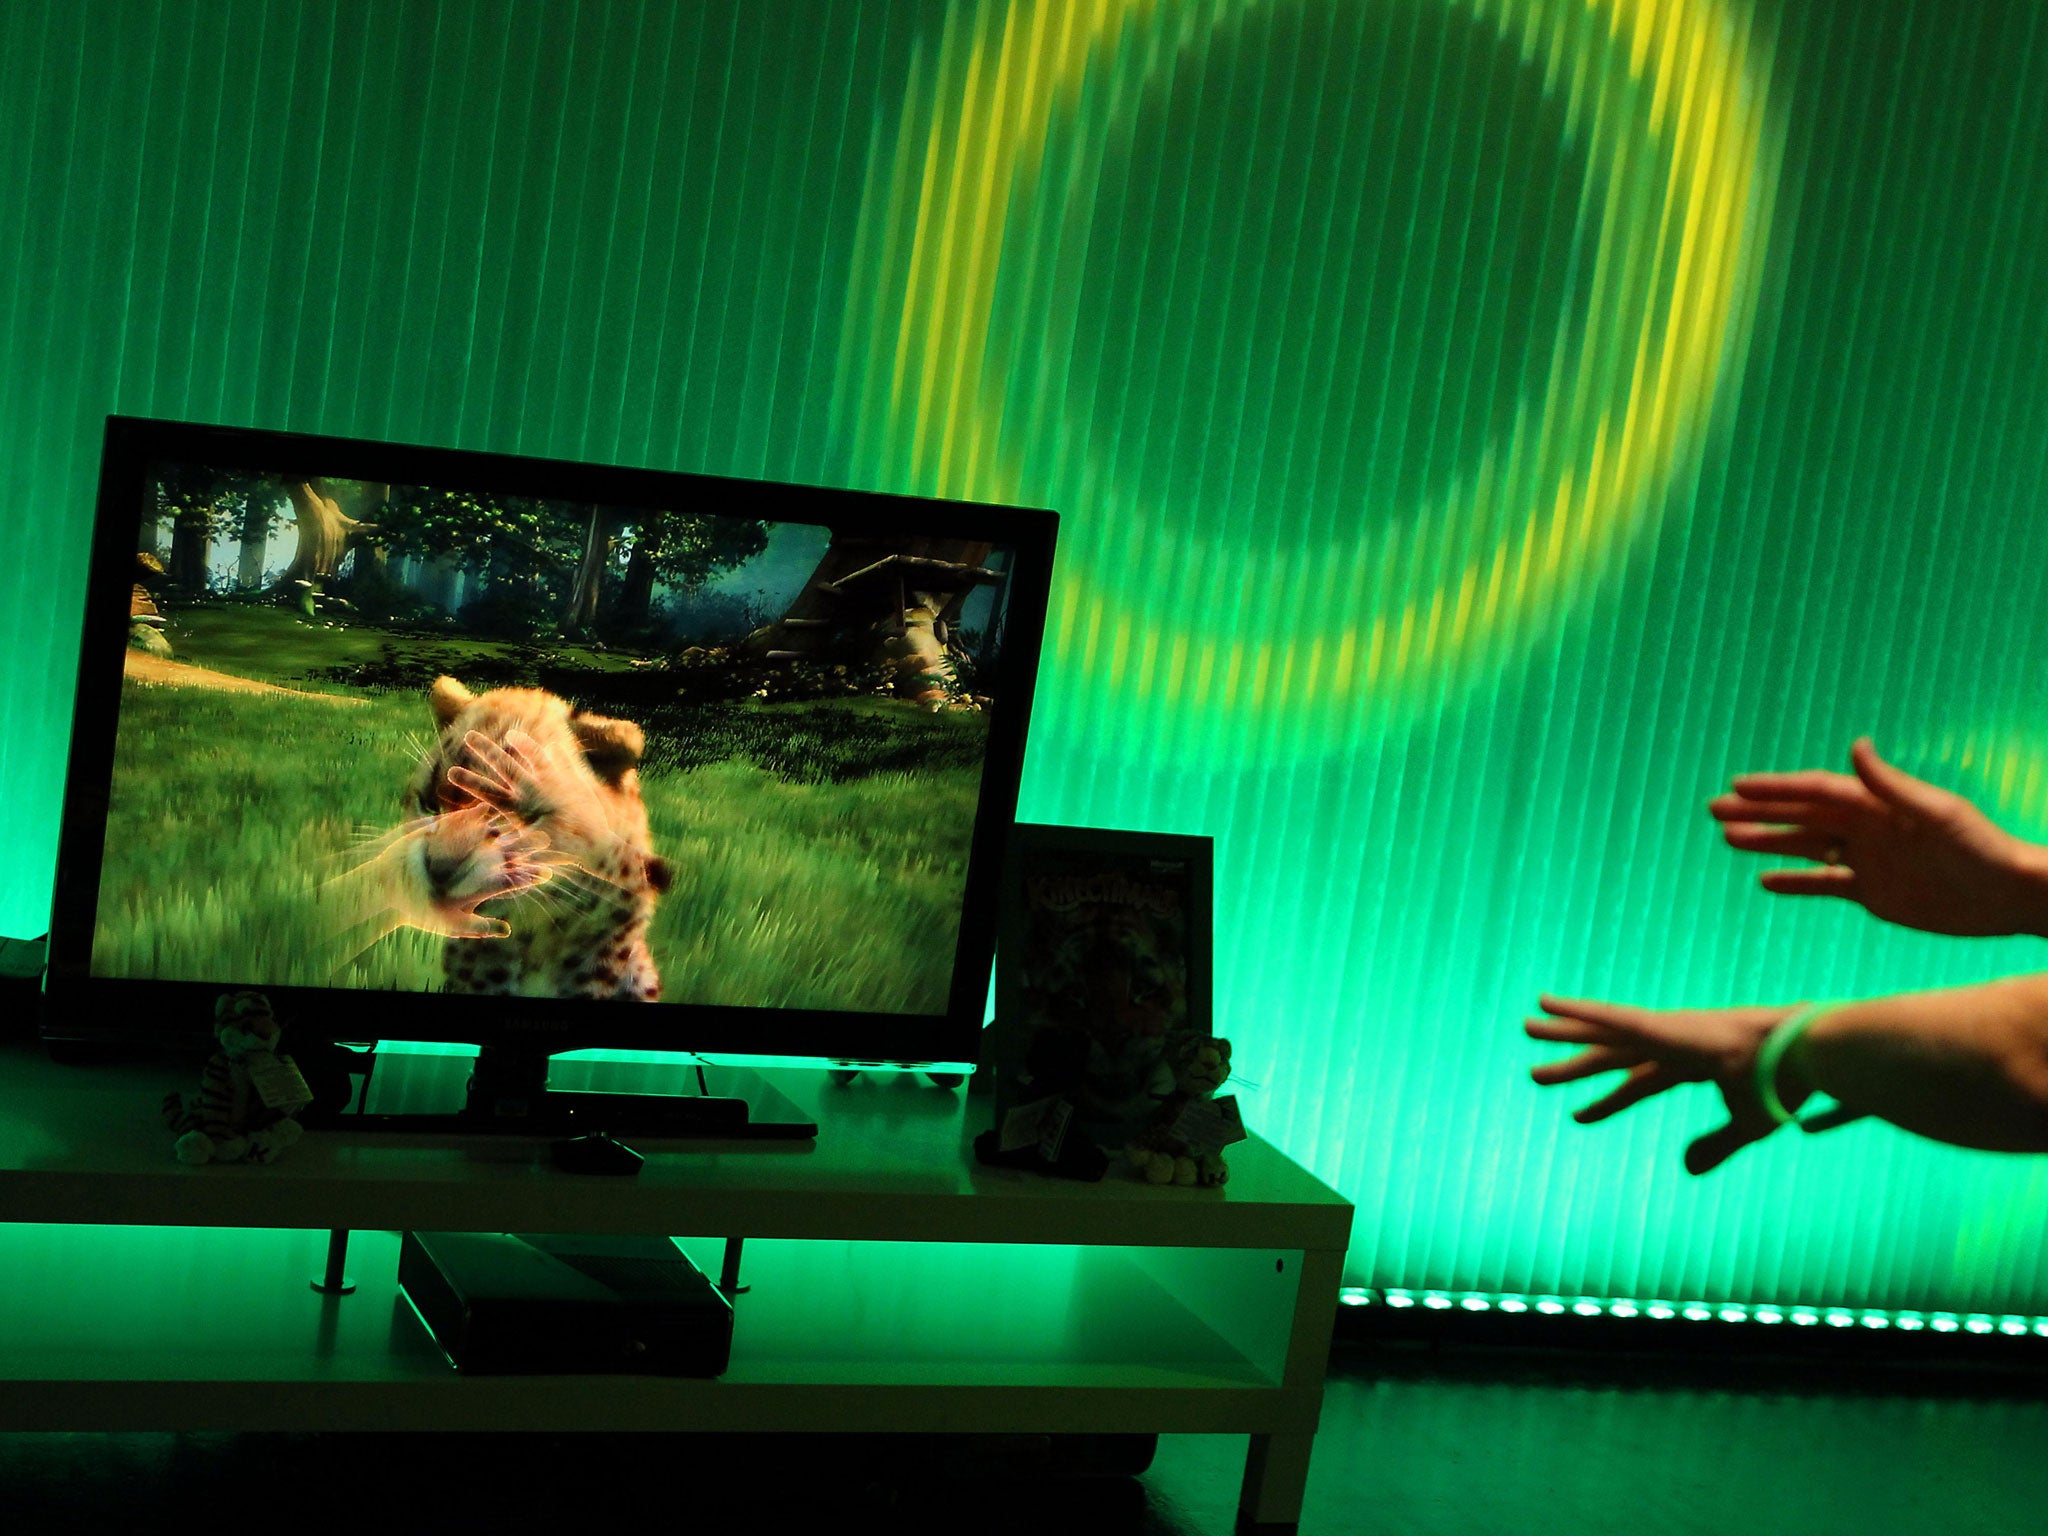 Microsoft's Xbox 360 is equipped with a Kinect motion-sensing controller